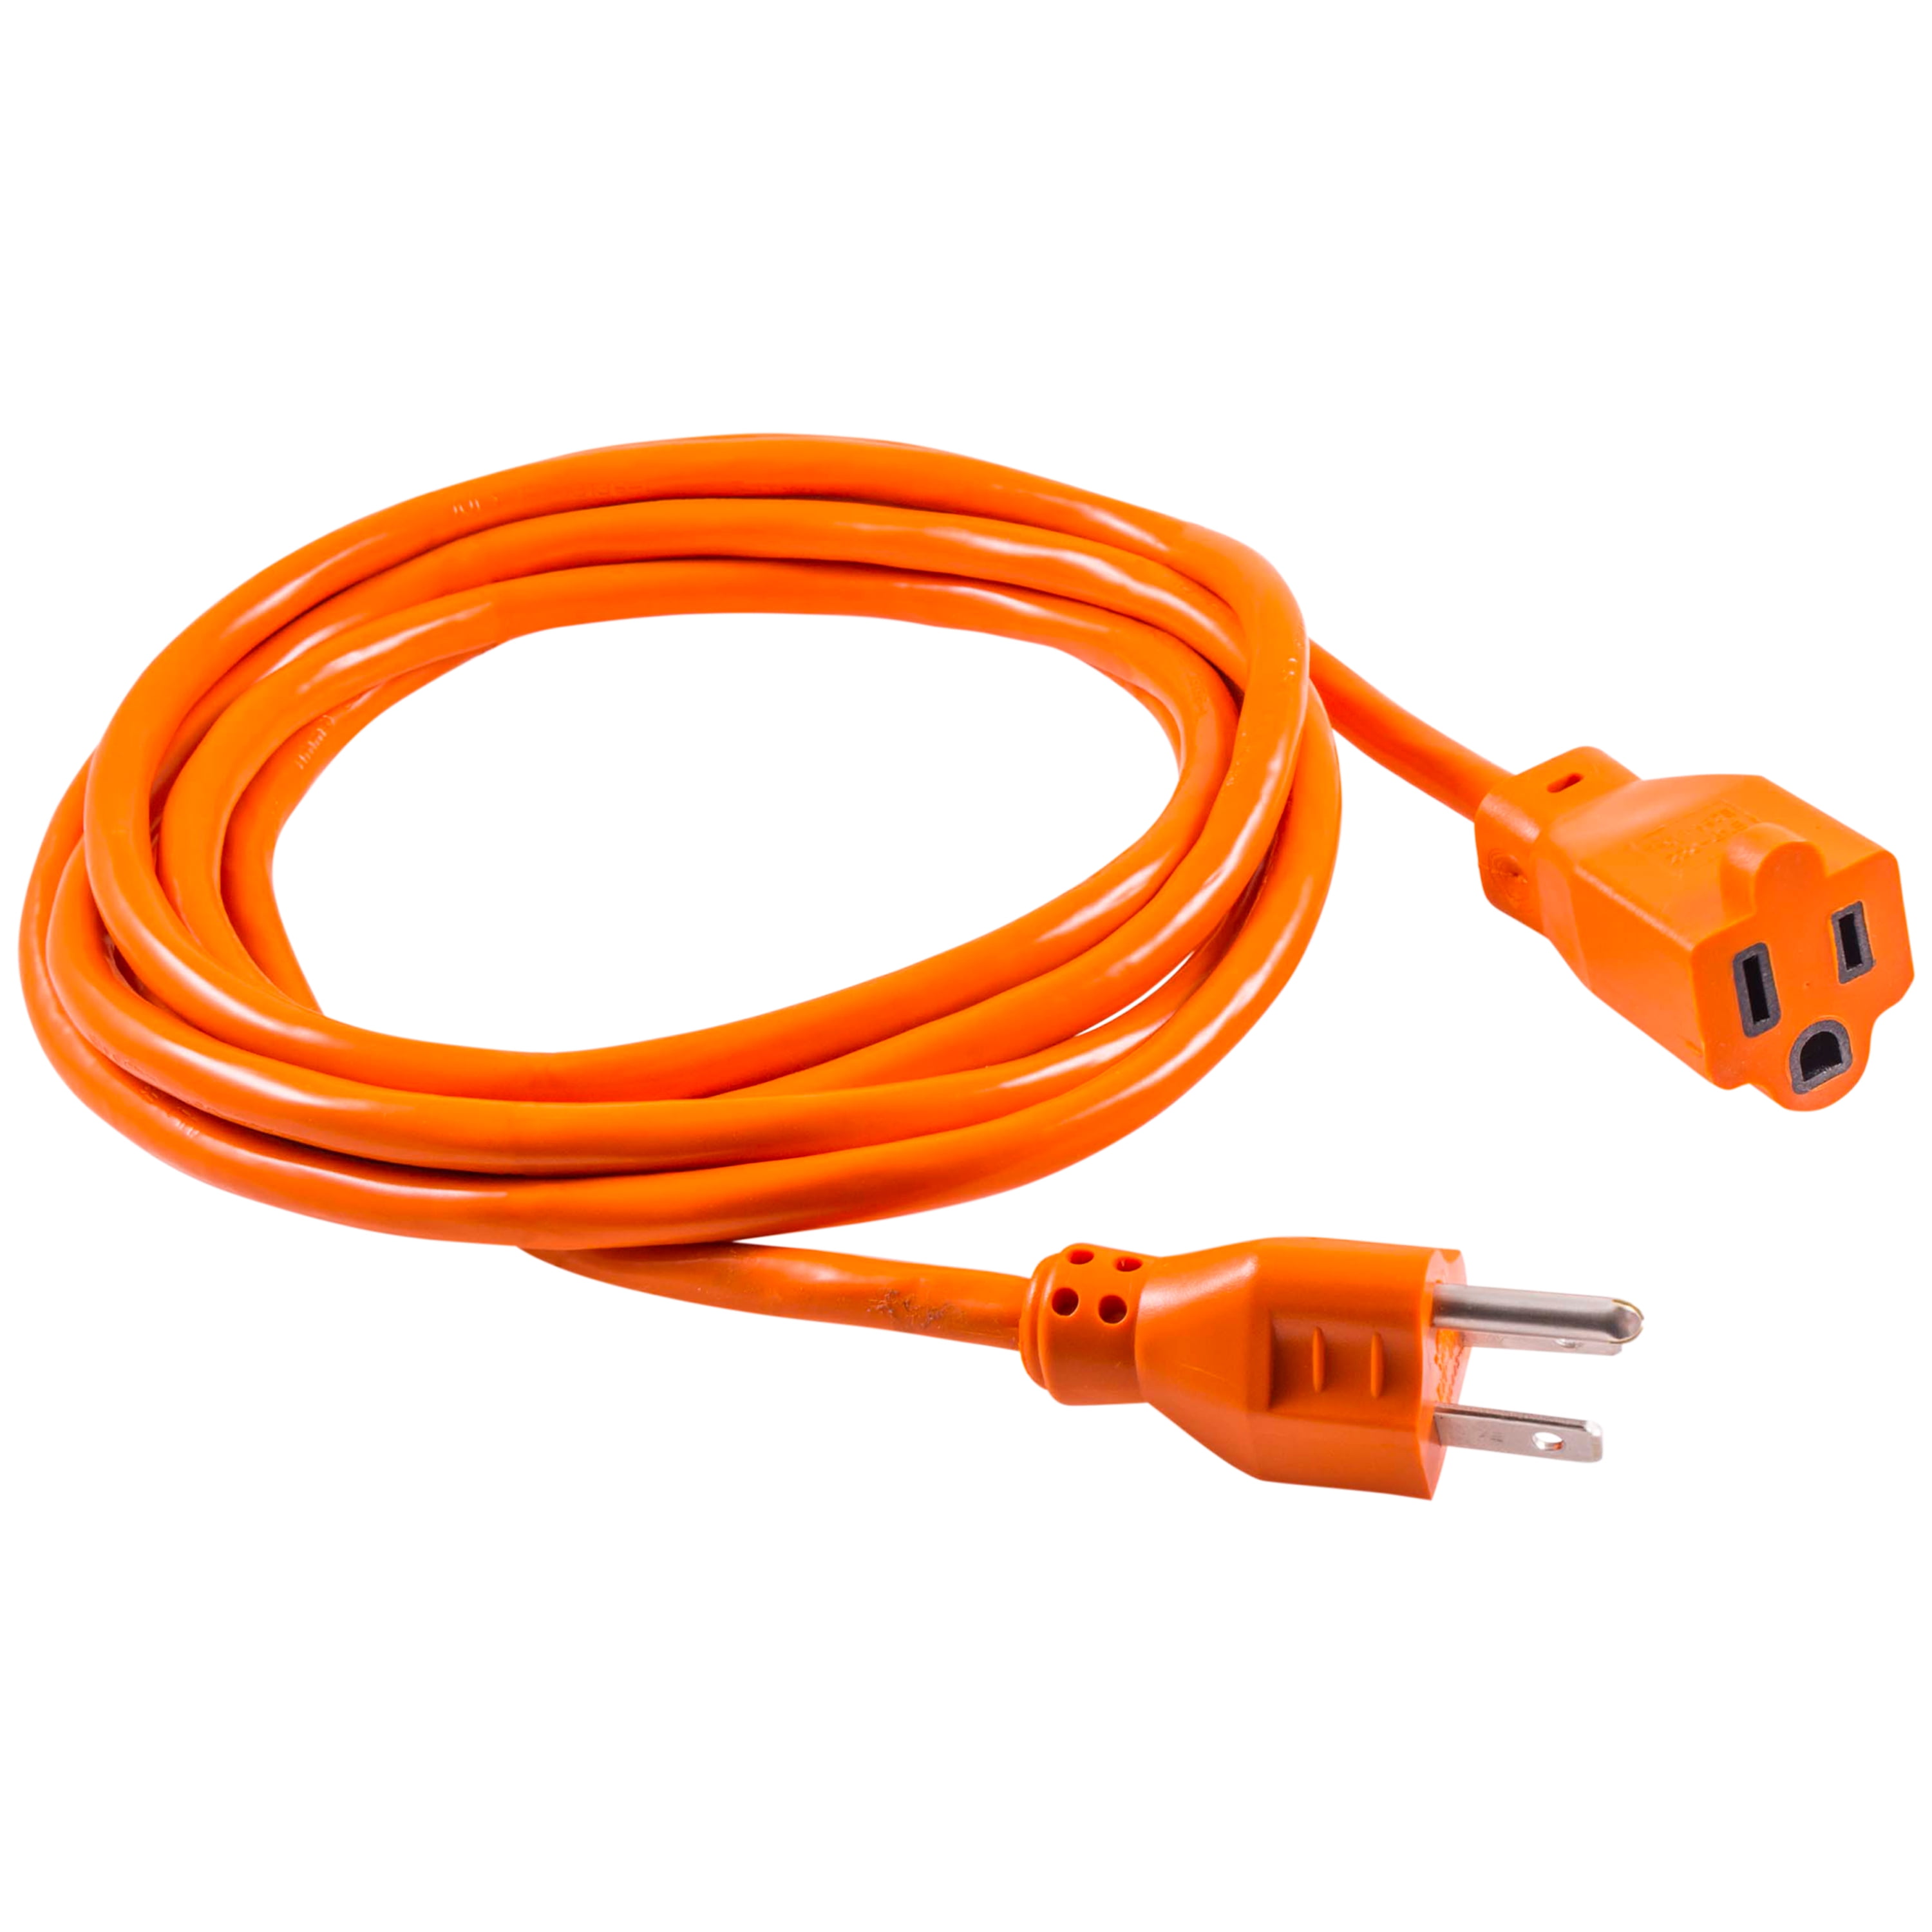 932519-3 Power First Locking Extension Cord, Outdoor, 15.0 A, 125V AC,  Number of Outlets 1, Yellow with Black Stripe